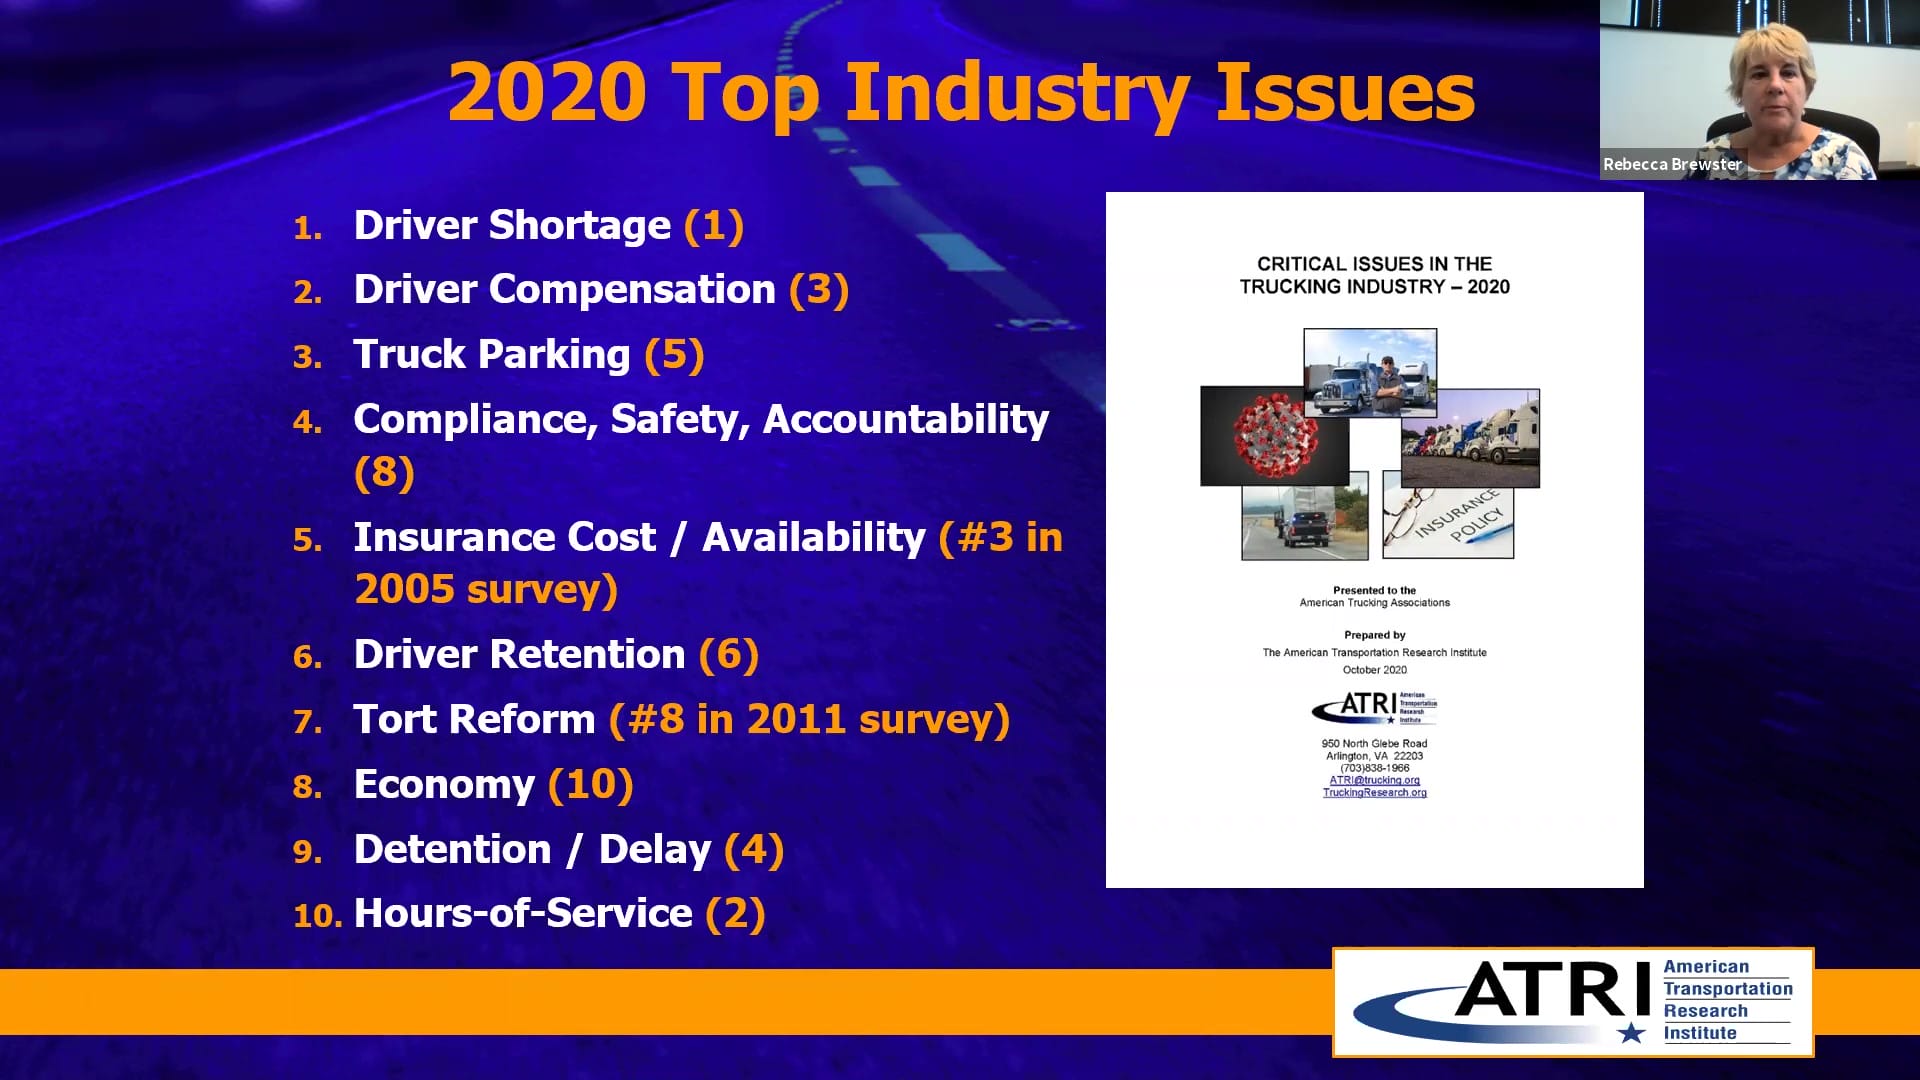 Trucking Industry Concerns 2020 from ATRI Top Issues